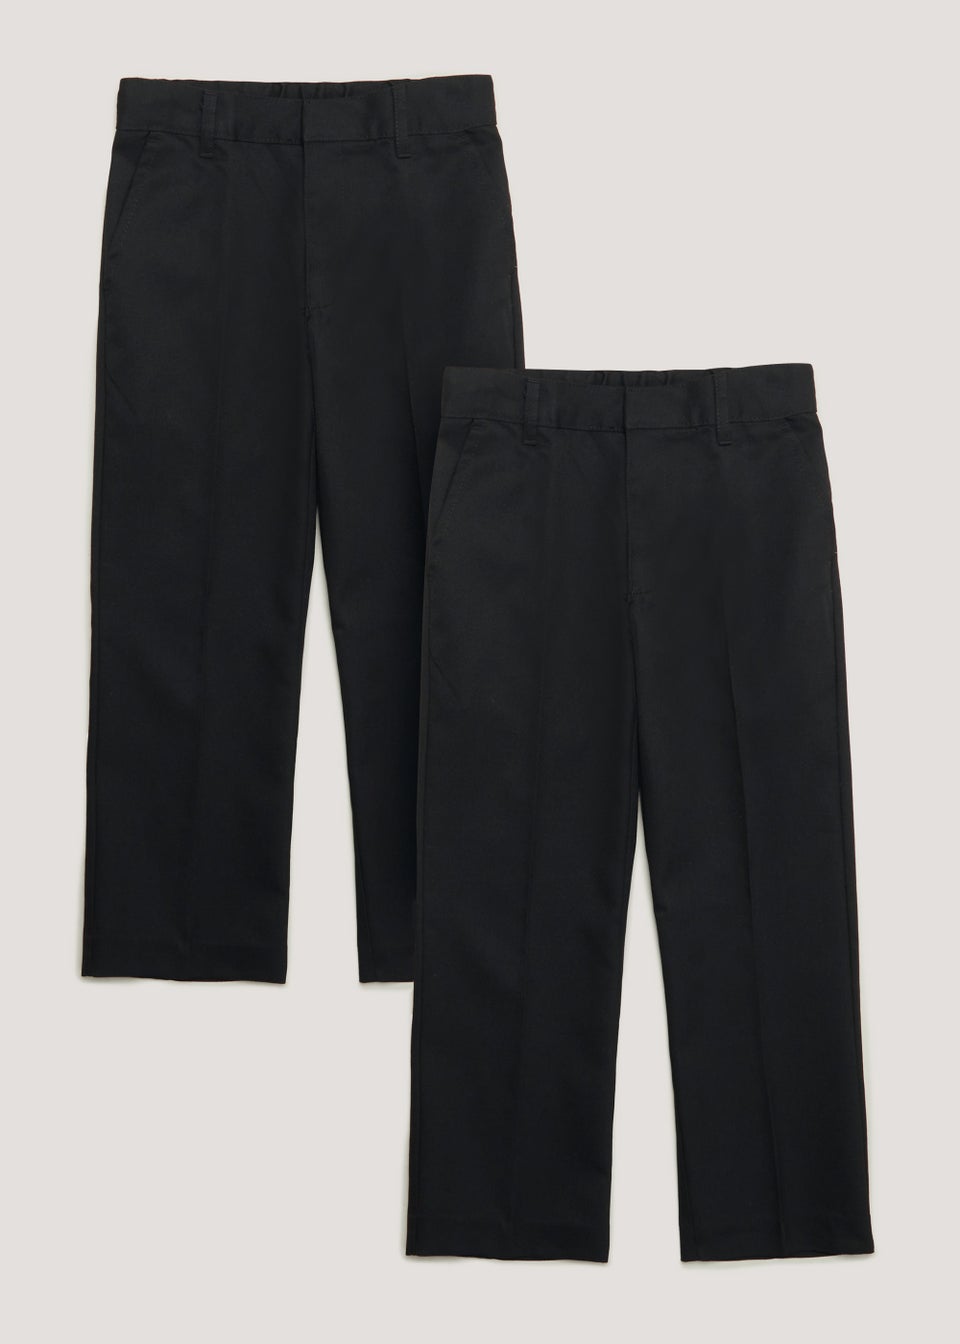 Boys 2 Pack Black Classic Fit & Generous Fit School Trousers (6-16yrs)